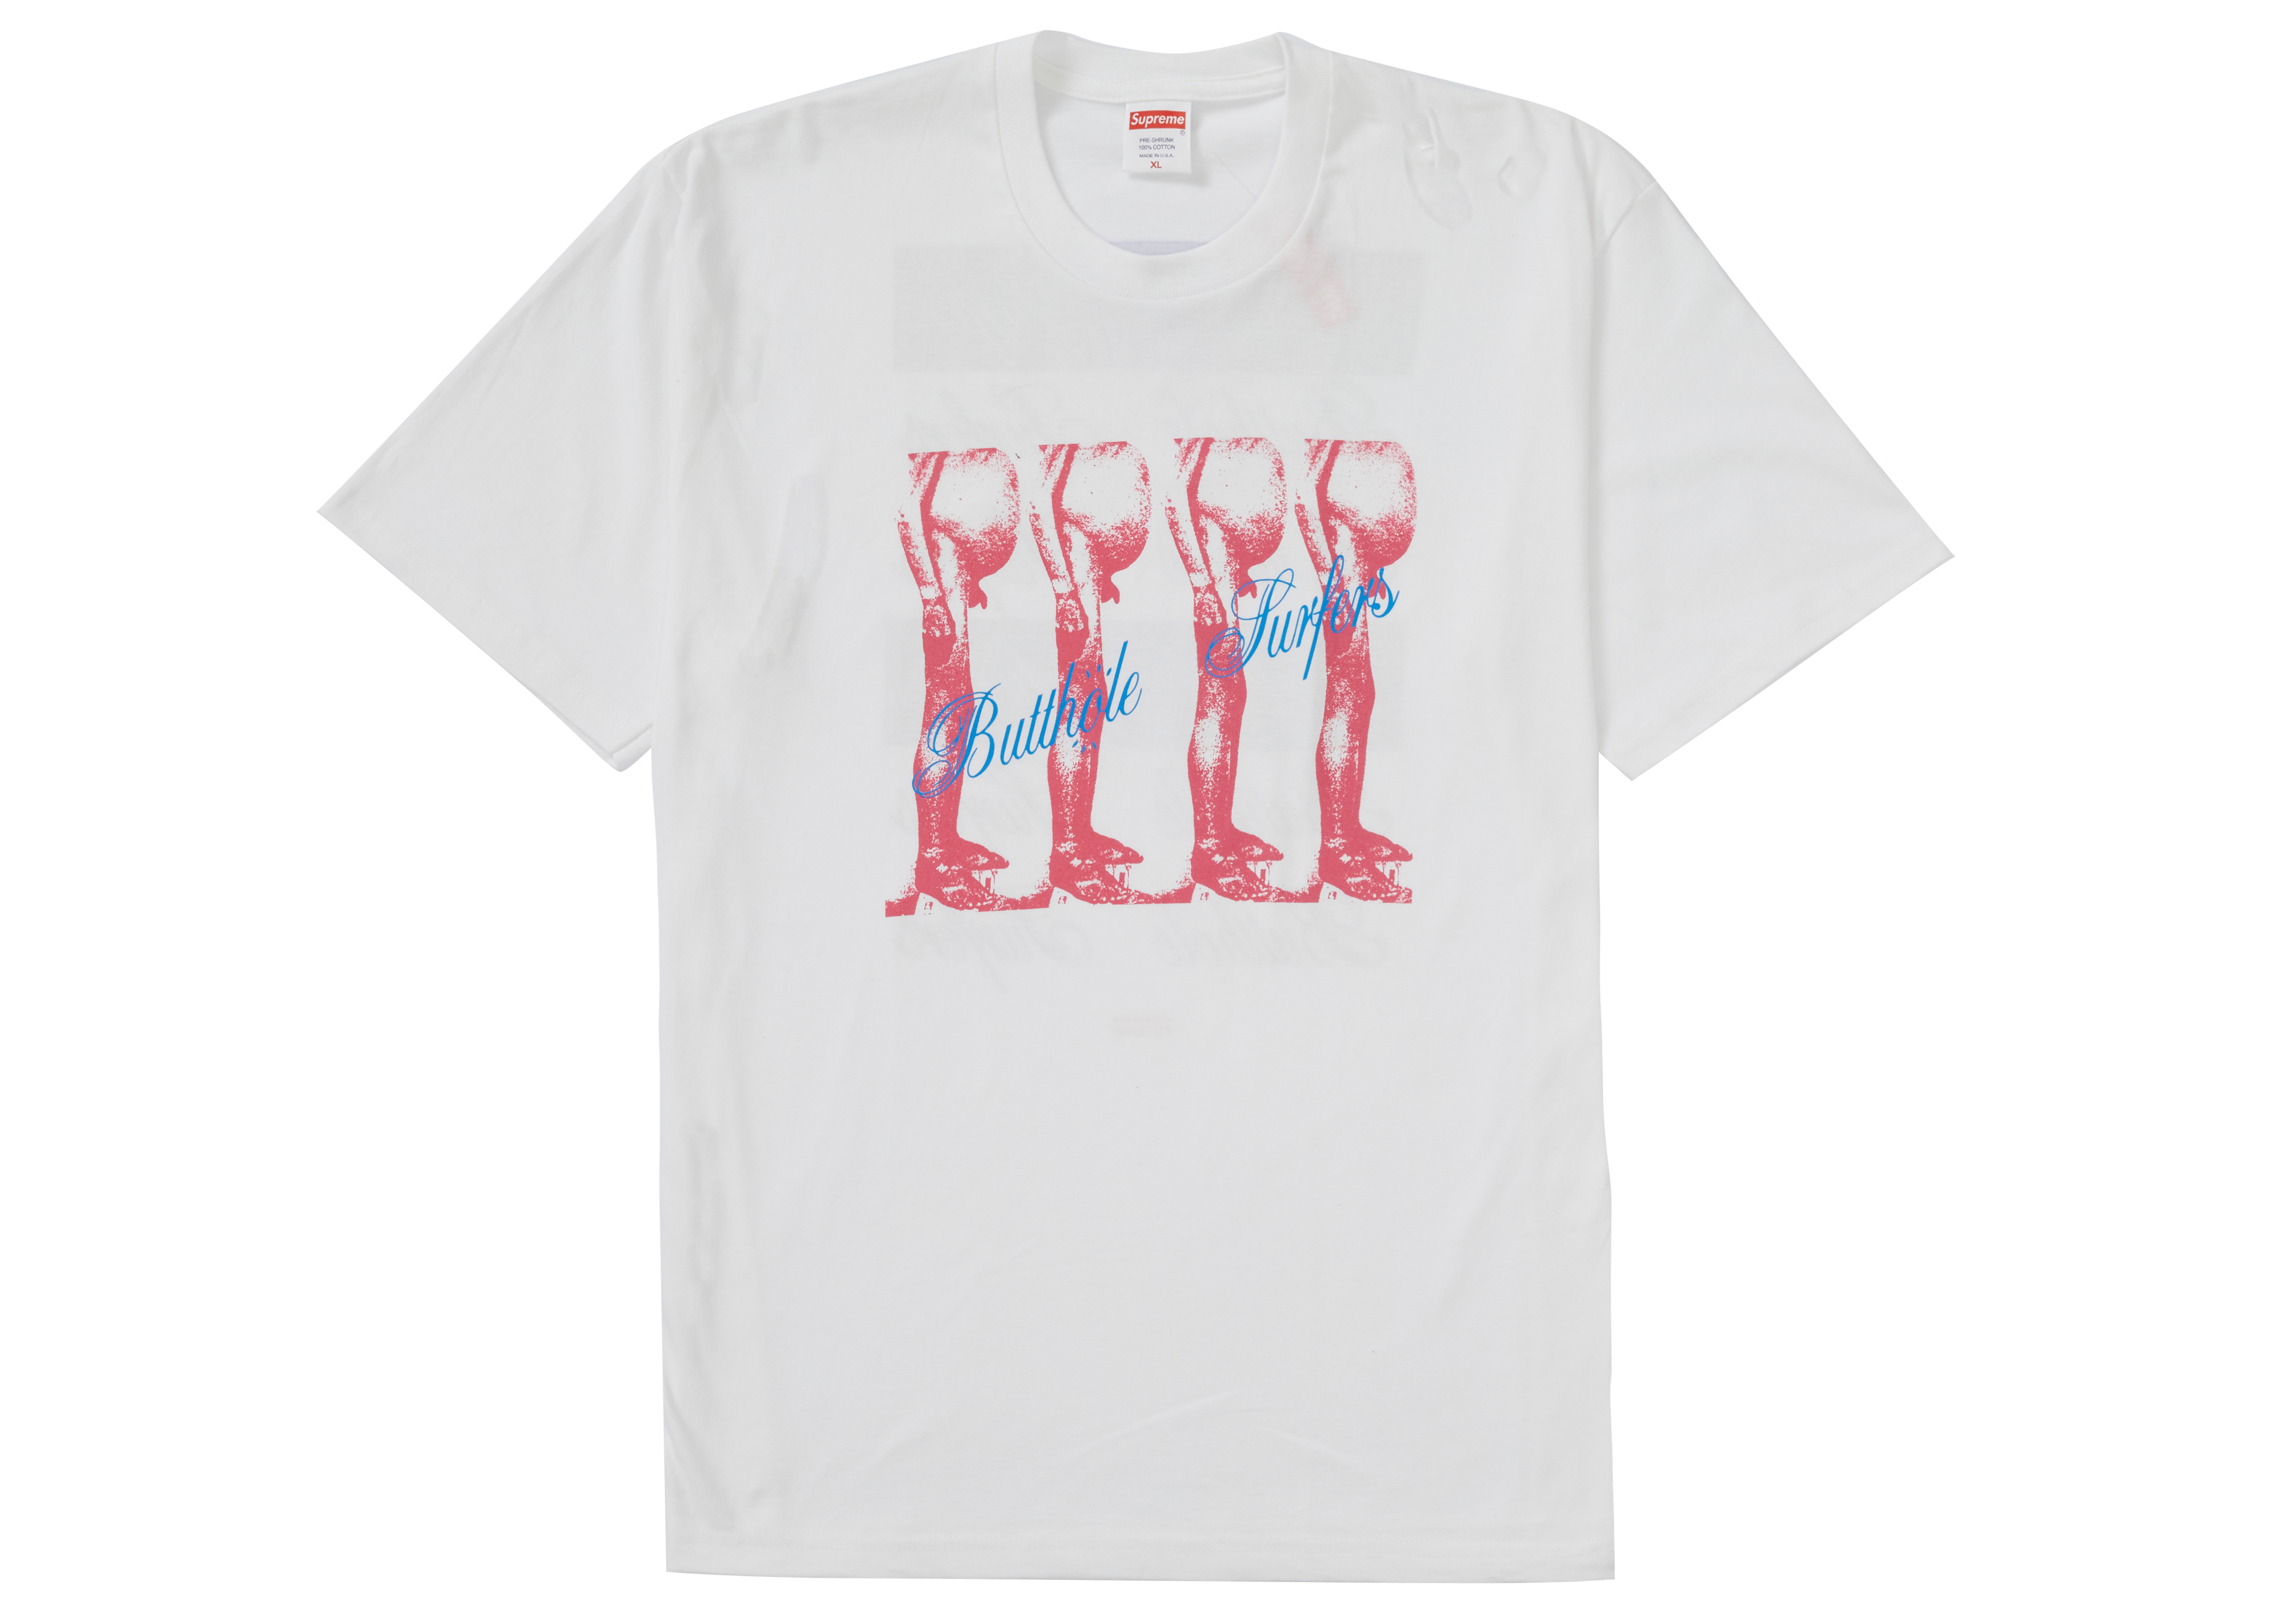 Supreme Butthole Surfers Tee White